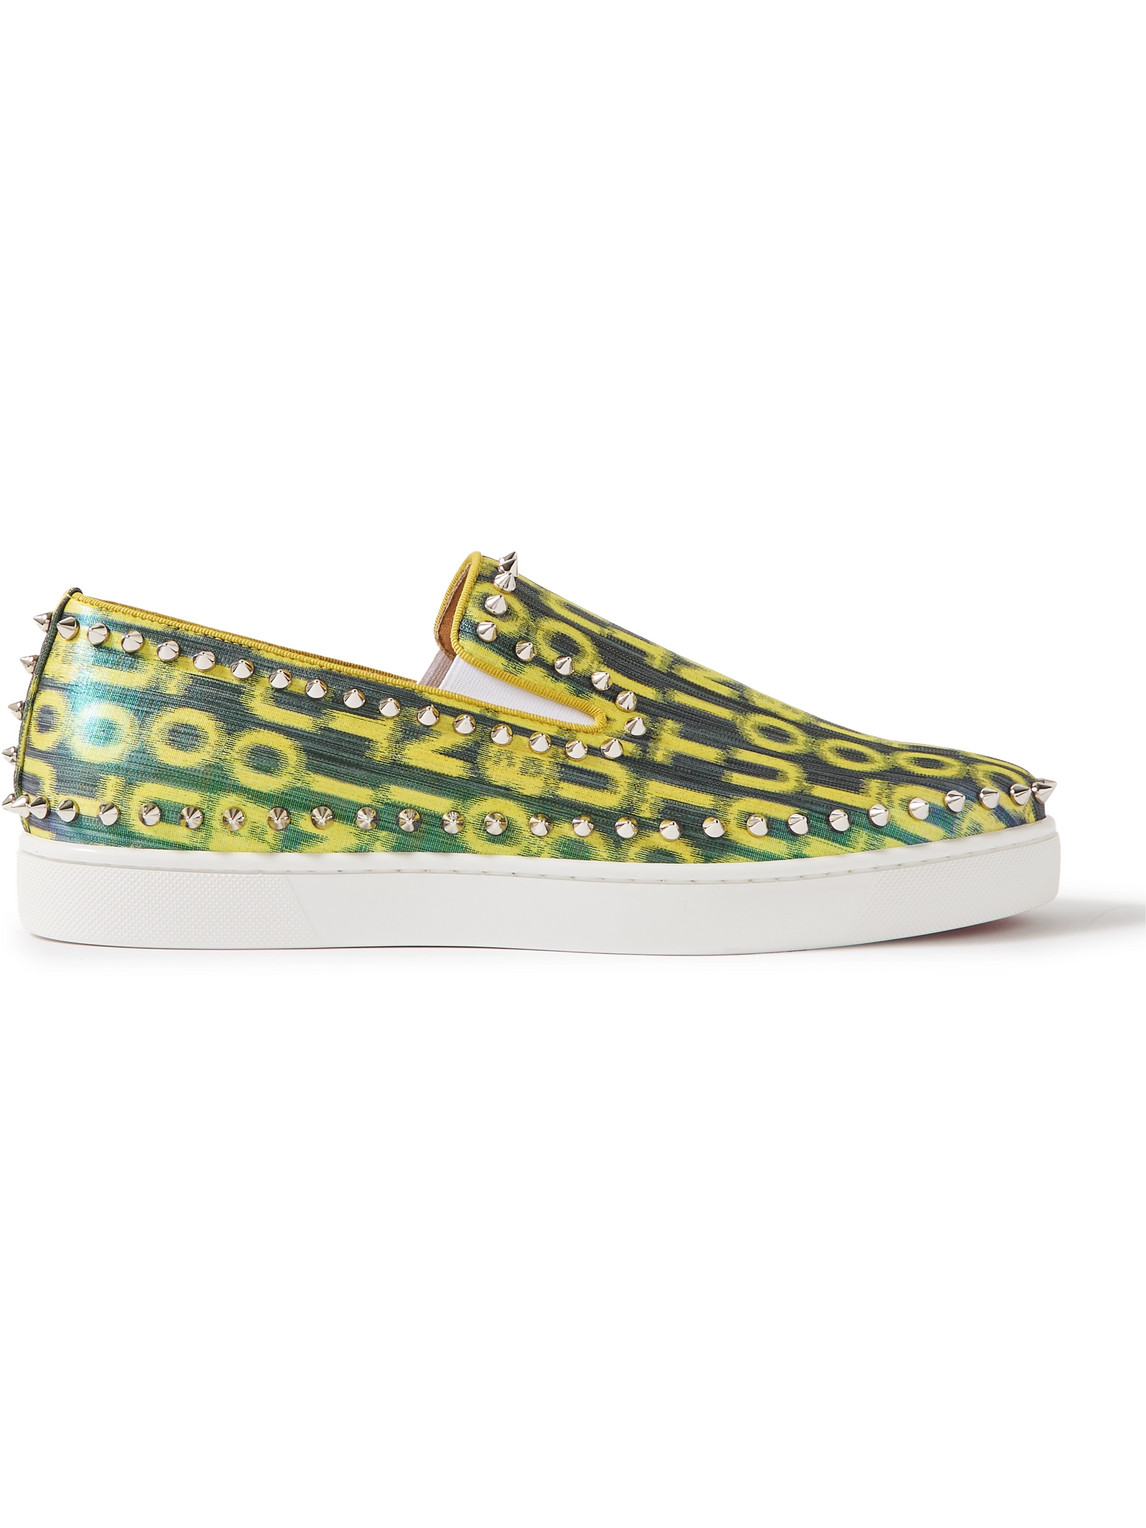 Christian Louboutin Pik Boat Spiked Glittered Logo-print Canvas Slip-on Sneakers In Yellow